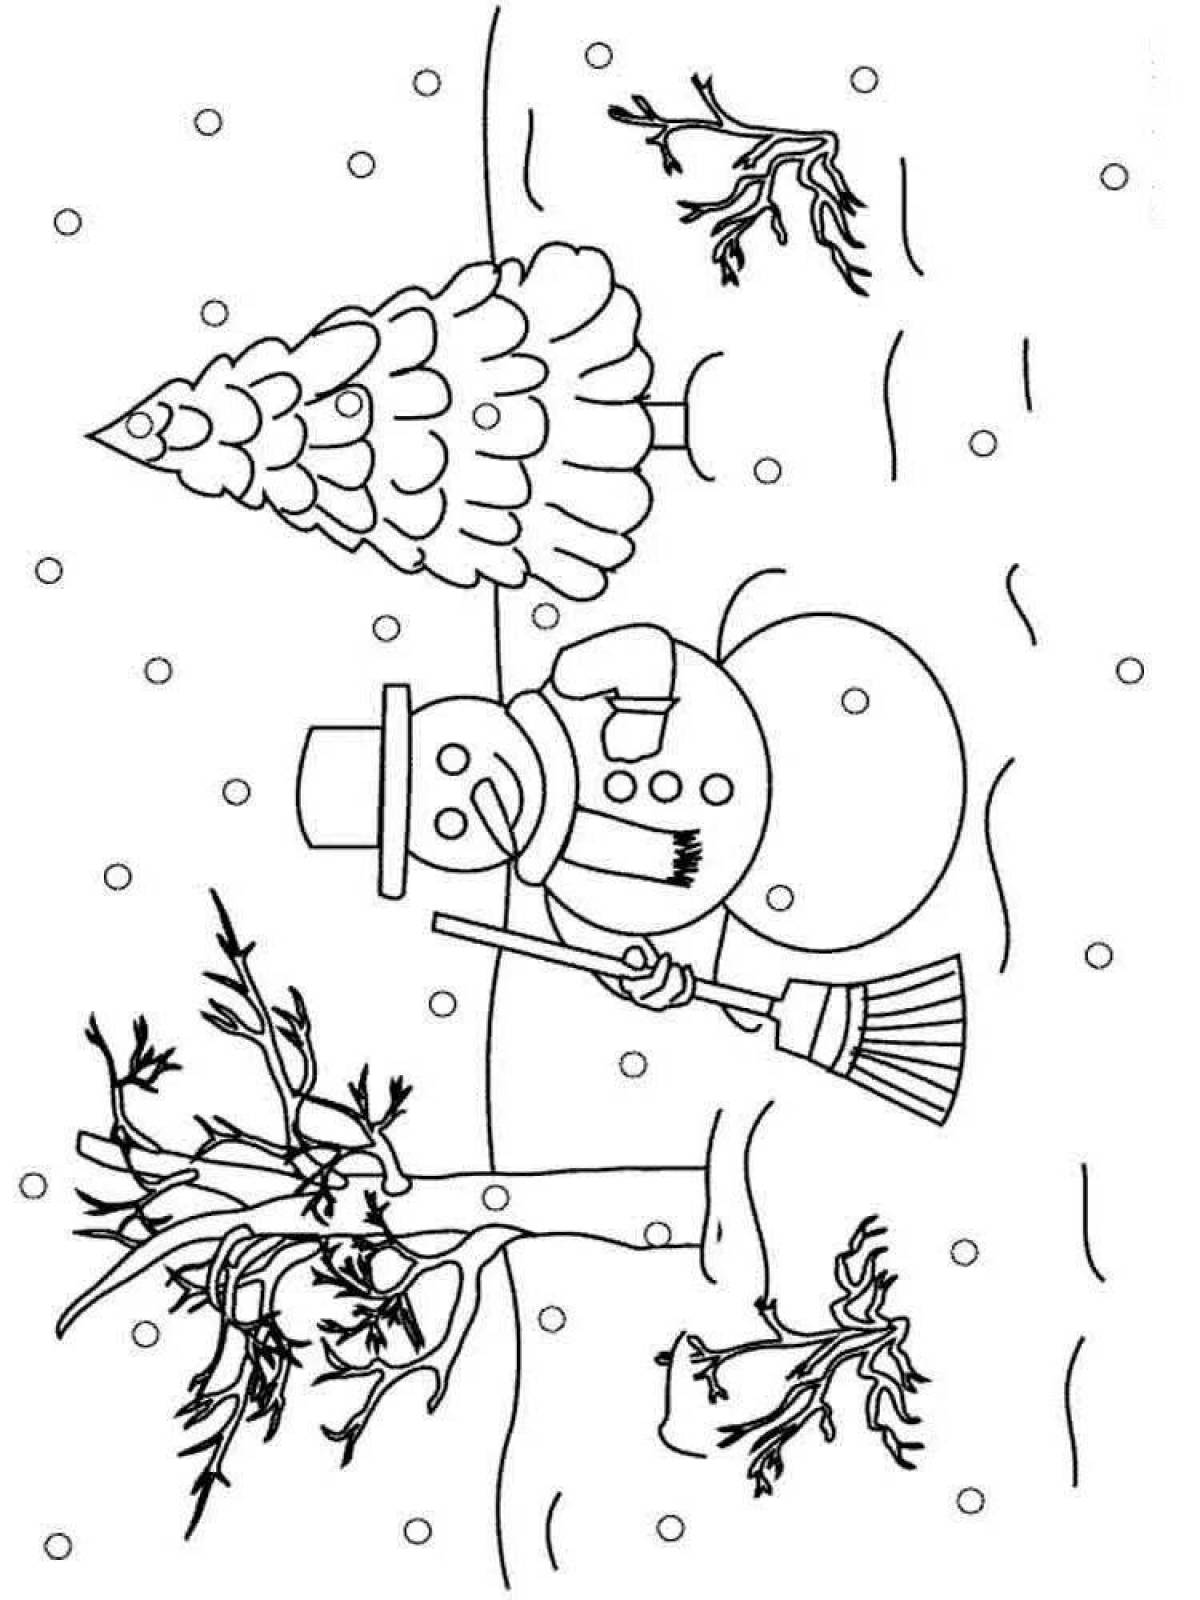 Shining blizzard coloring page